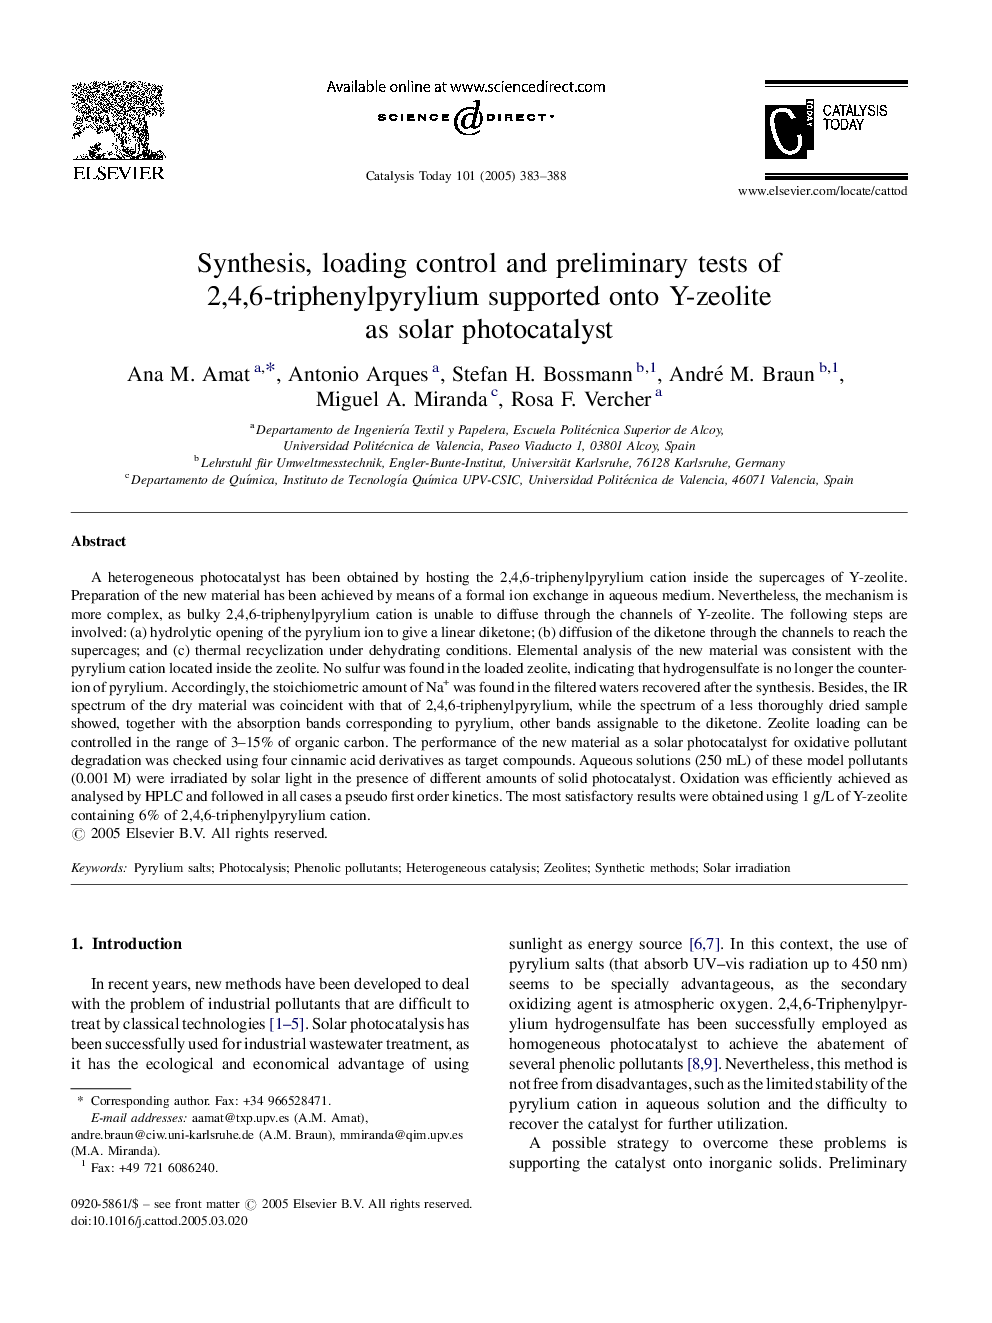 Synthesis, loading control and preliminary tests of 2,4,6-triphenylpyrylium supported onto Y-zeolite as solar photocatalyst